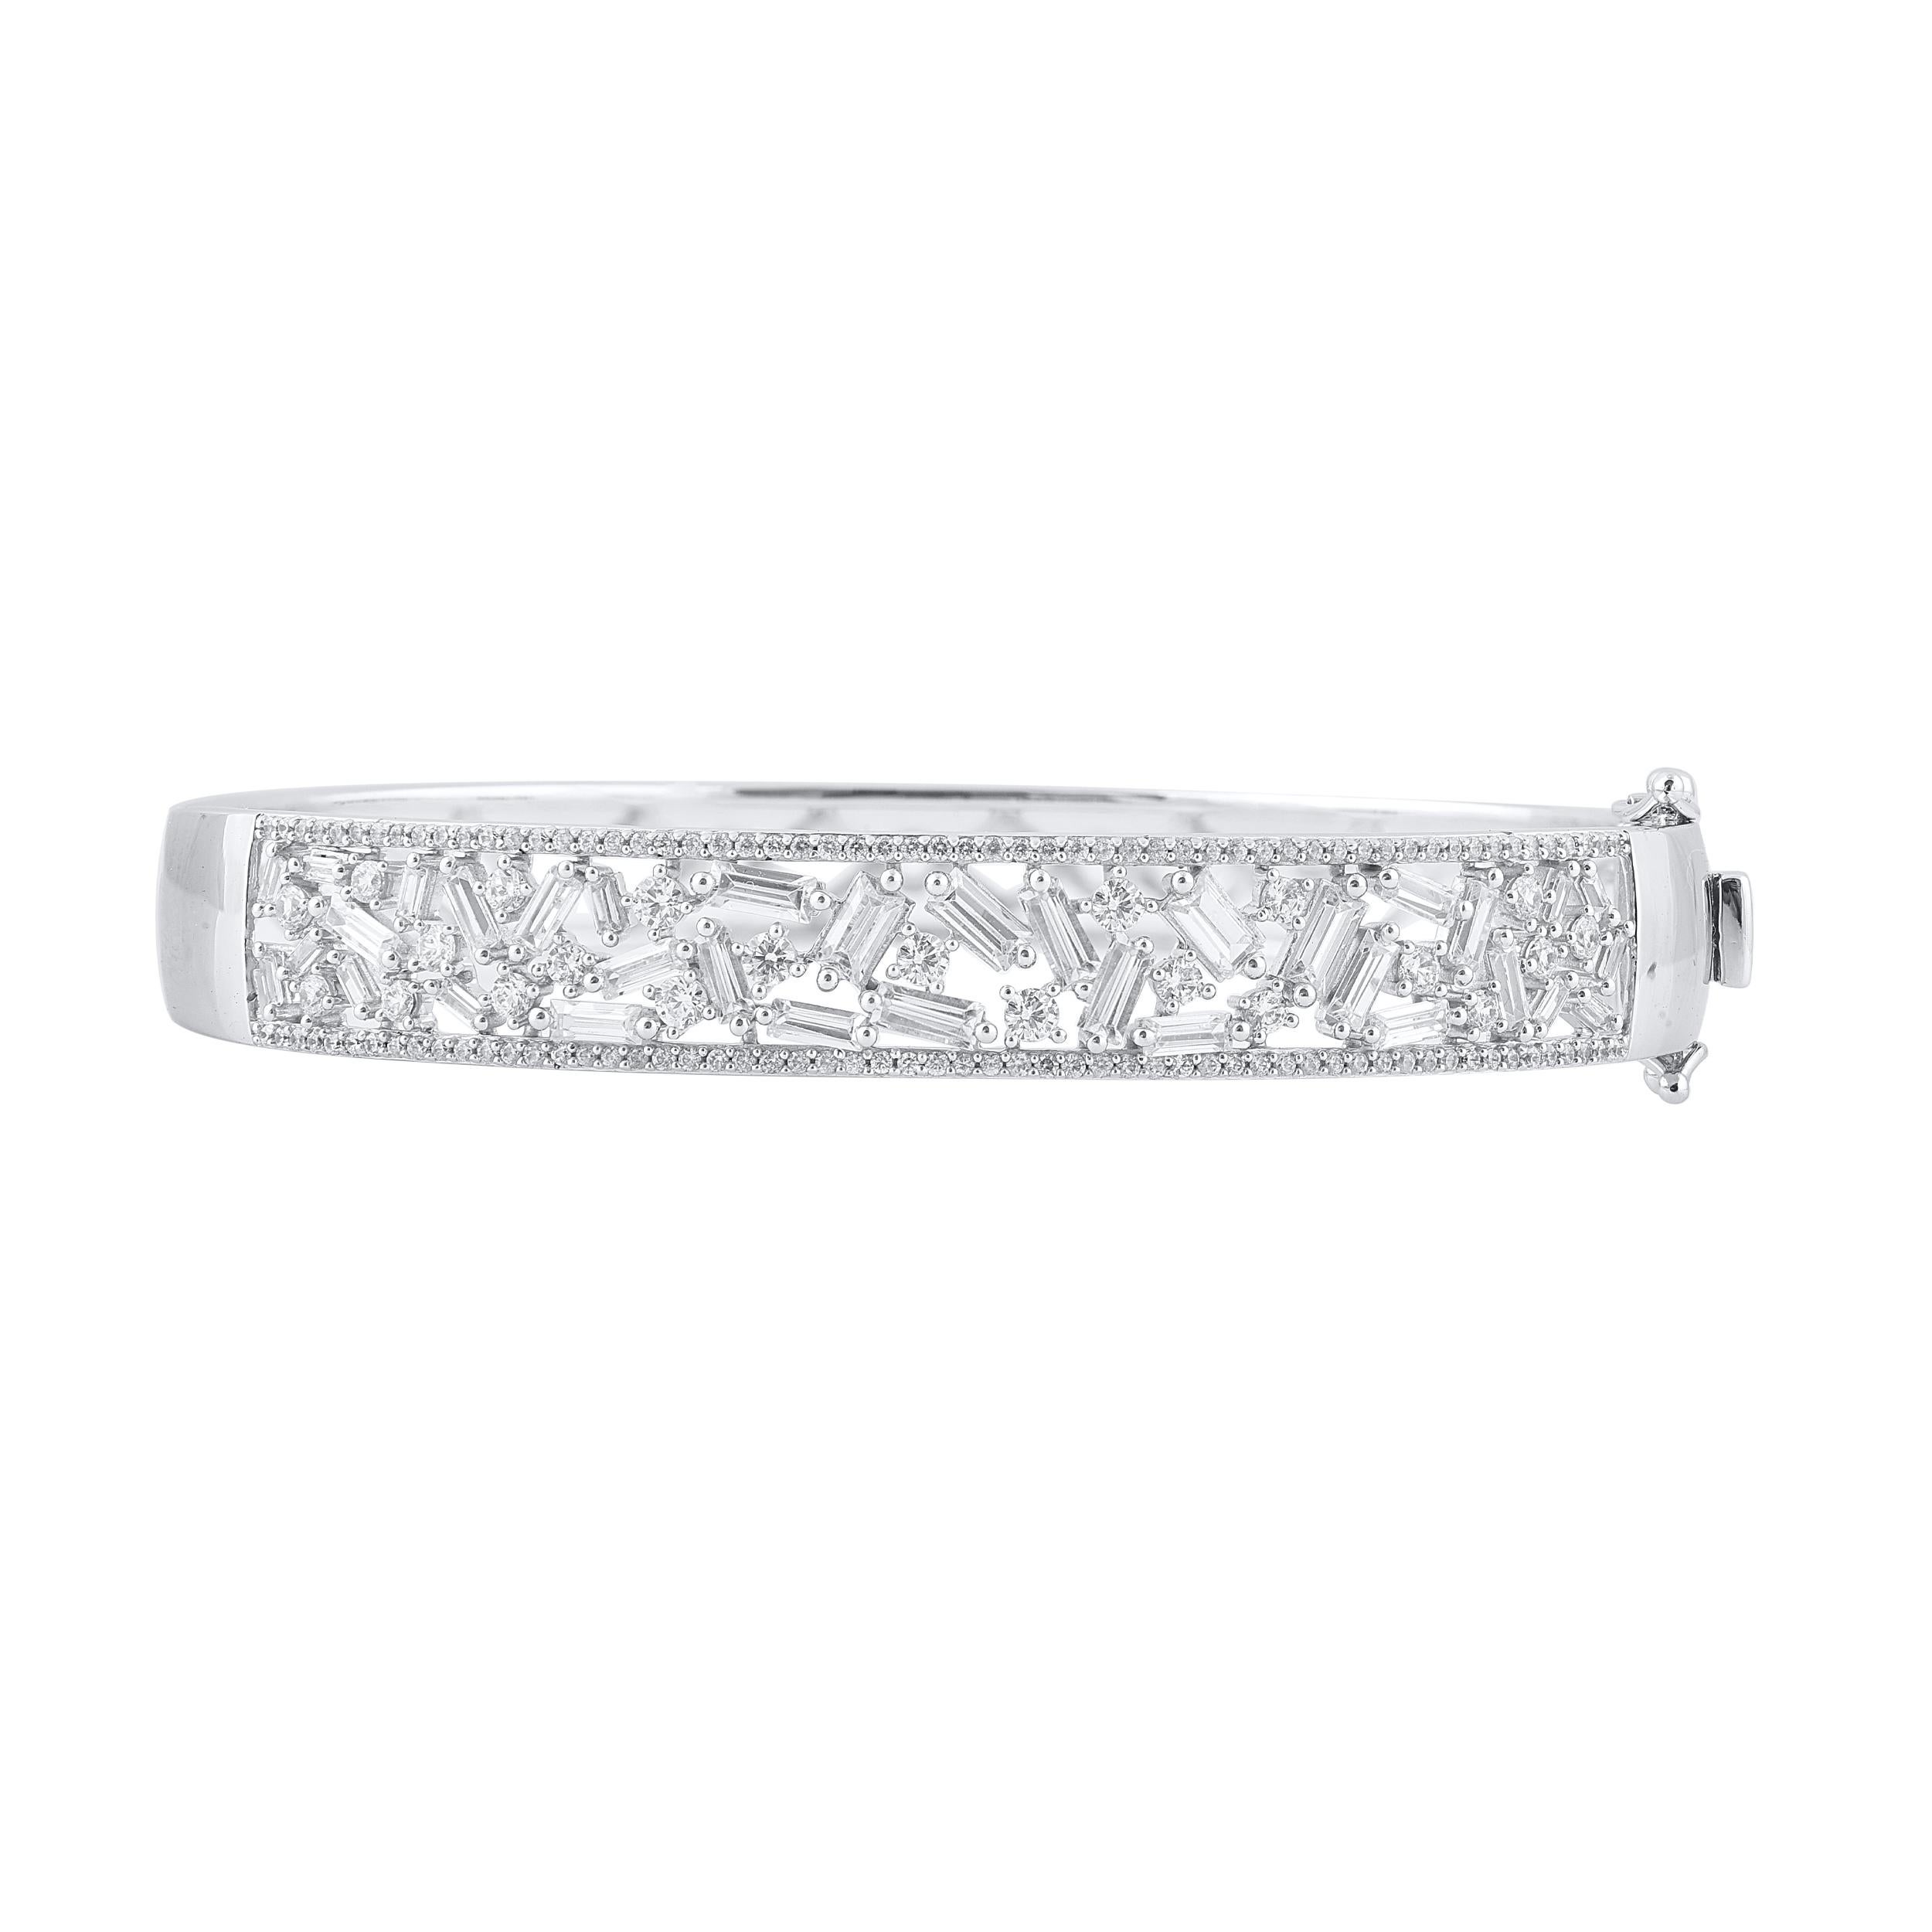 Make that special occasion even more special with this glistening diamond bangle bracelet. This Shimmering bangle bracelet features 172 natural round single cut, brilliant cut & baguette diamonds in prong setting and crafted in 18kt white gold.